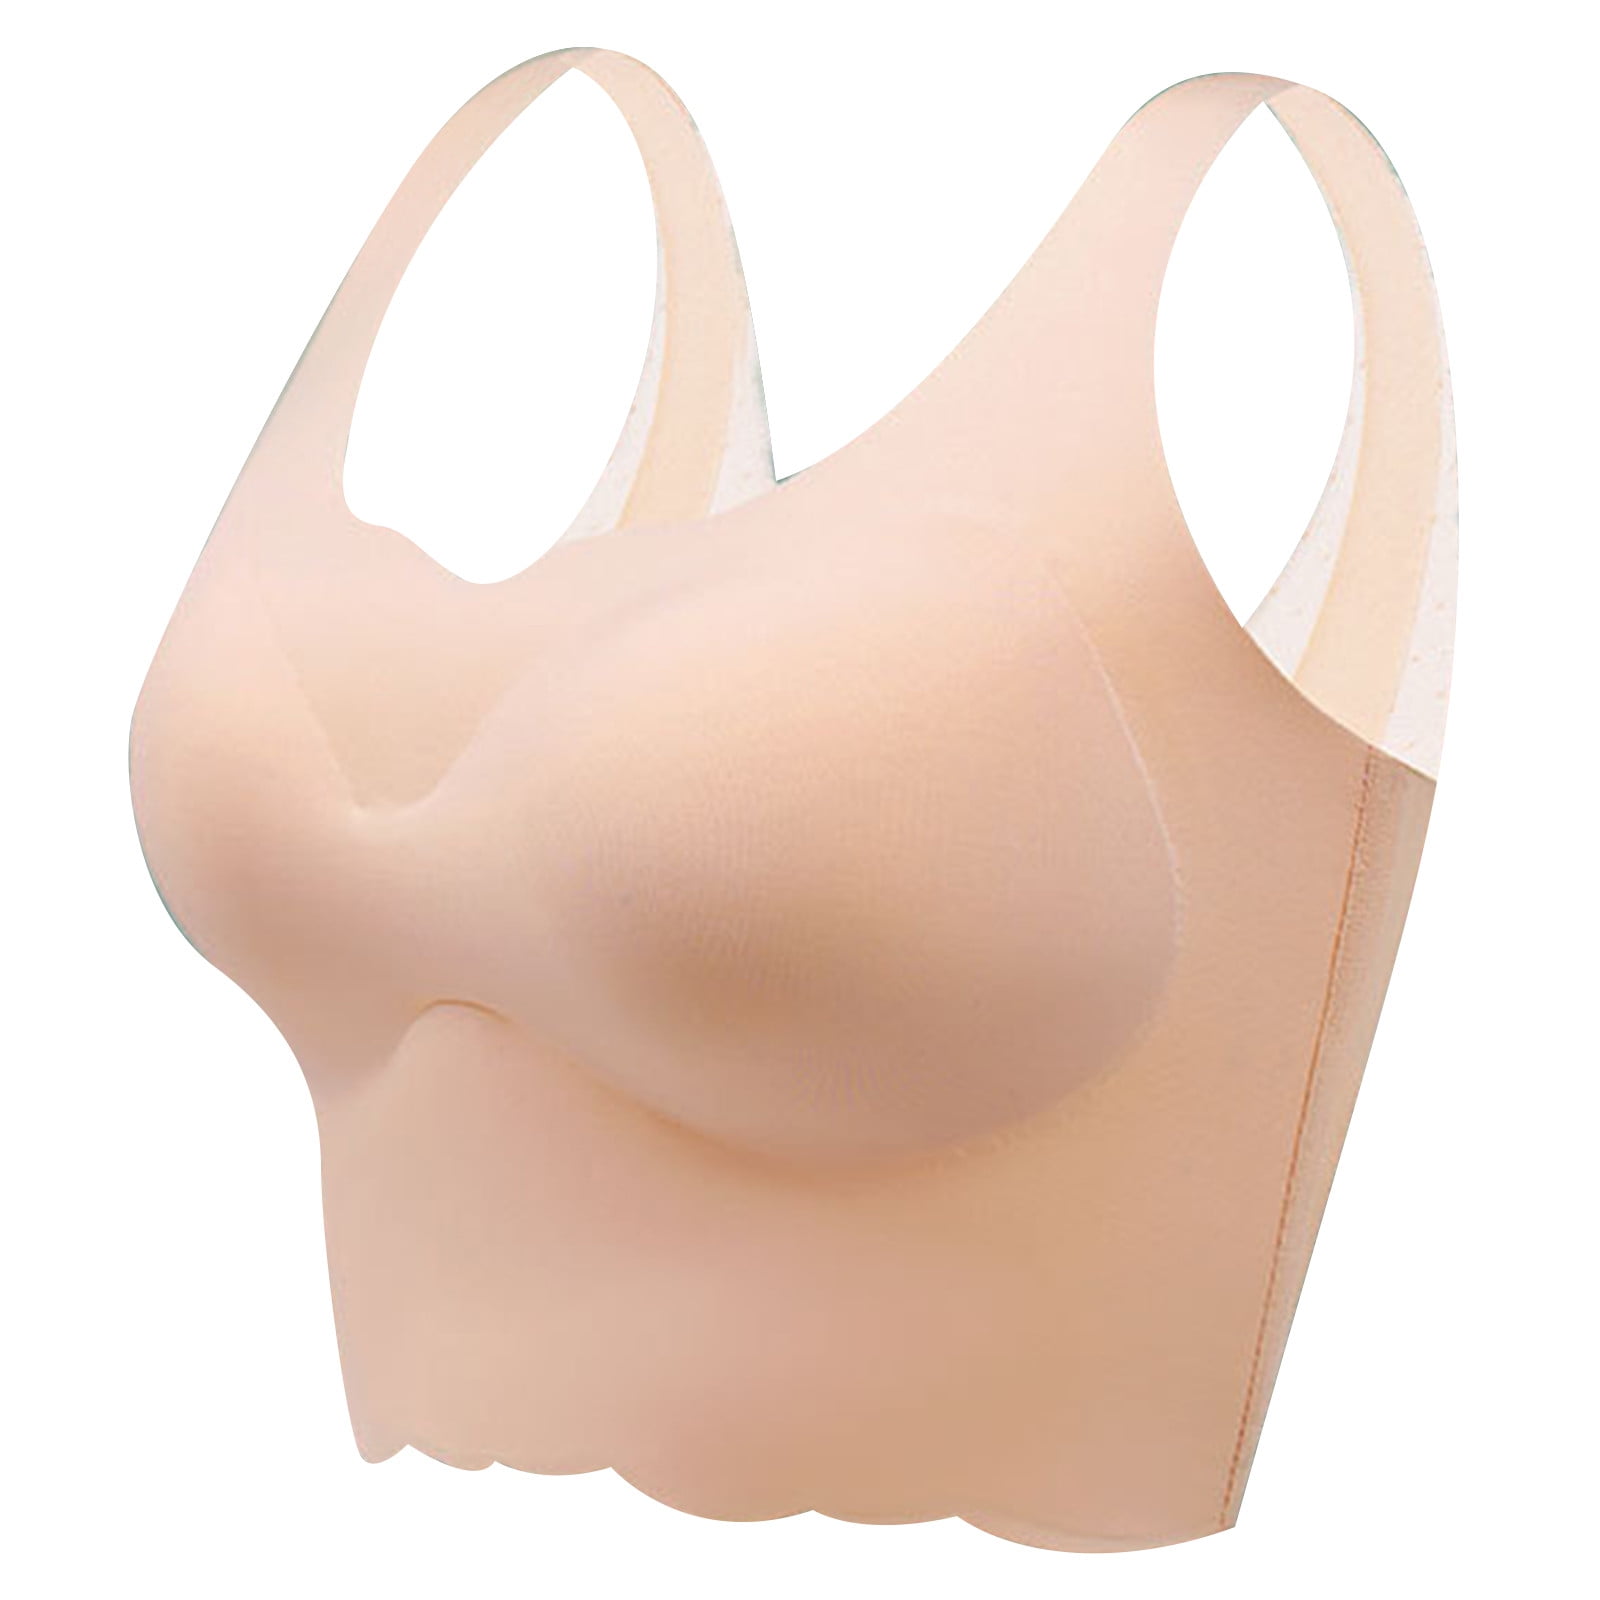 adviicd Under Outfit Bras for Women Natural Boost Demi Bra, Push